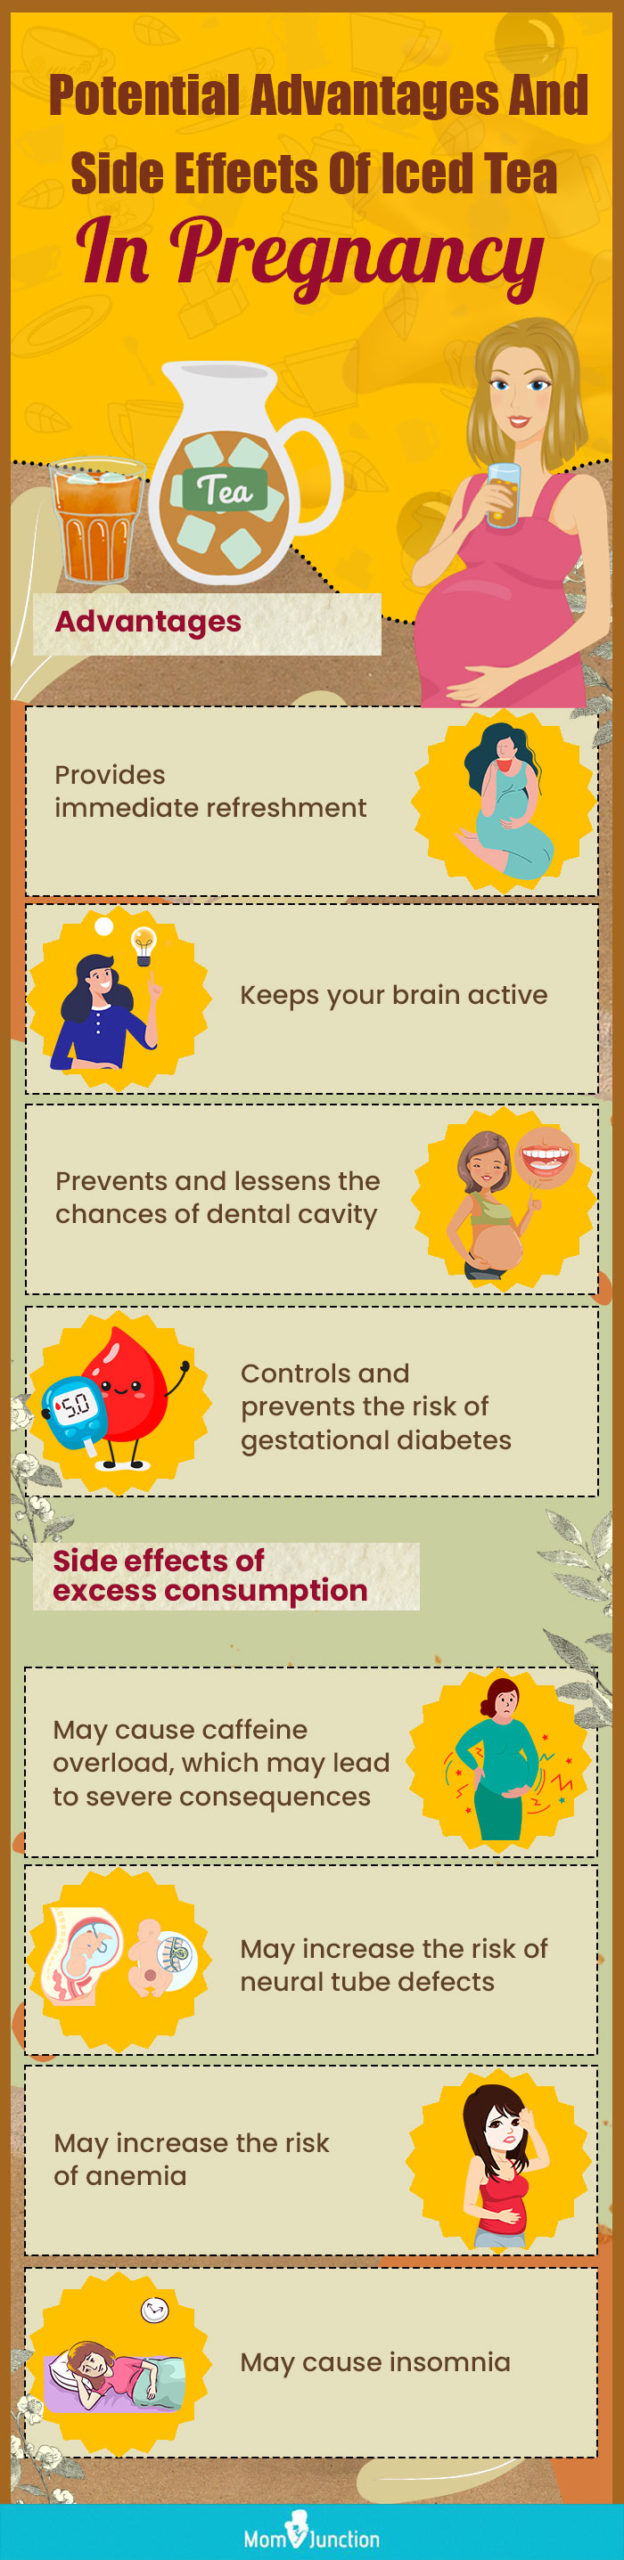 potential advantages and side effects of iced tea in pregnancy (infographic)